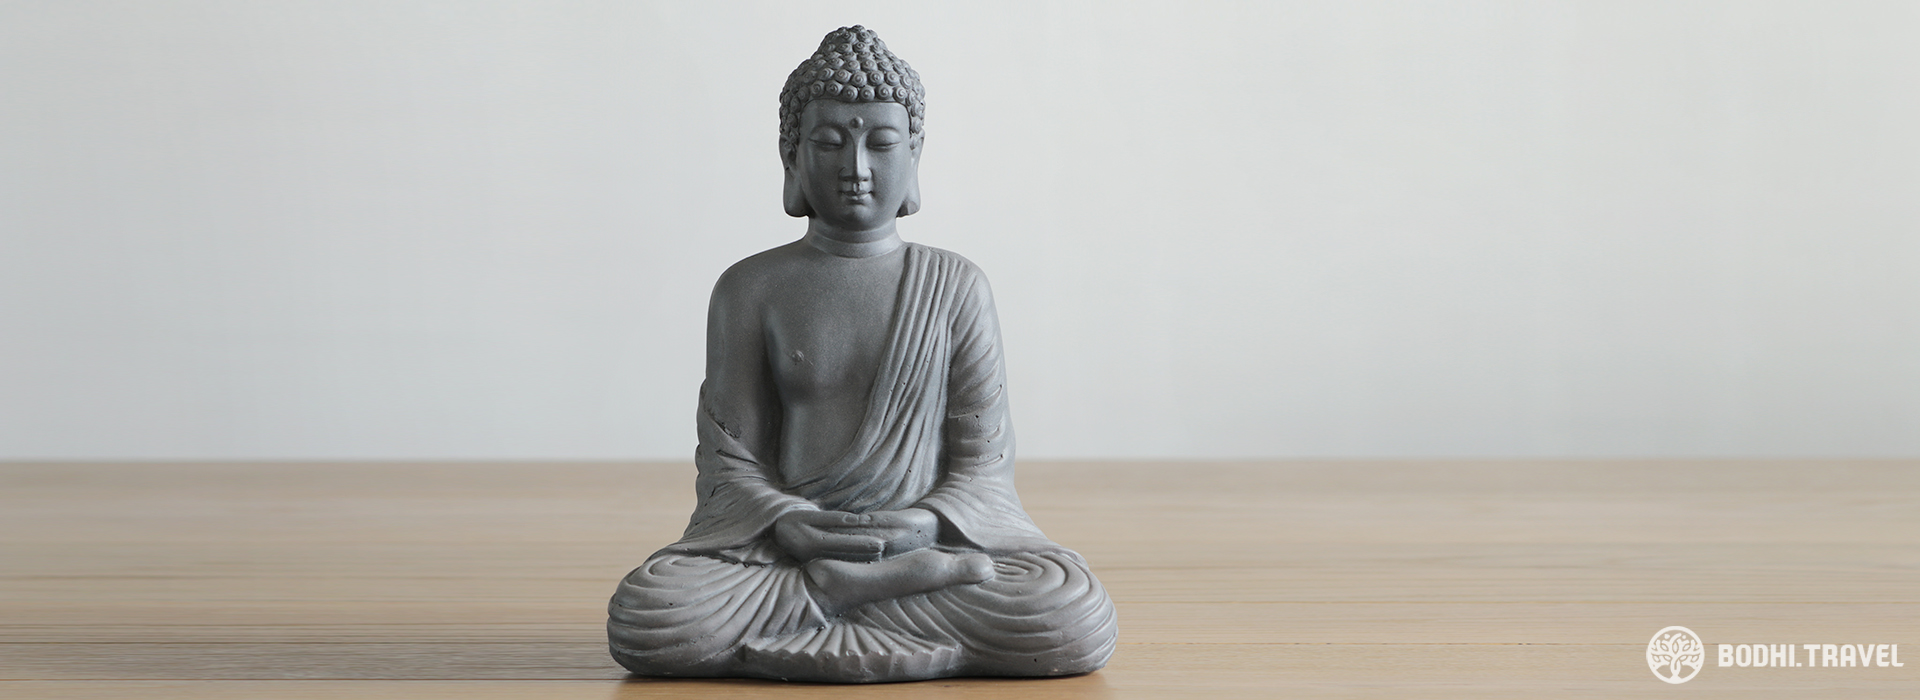 Four Things To Consider When Buying A Buddha Statue  YouTube